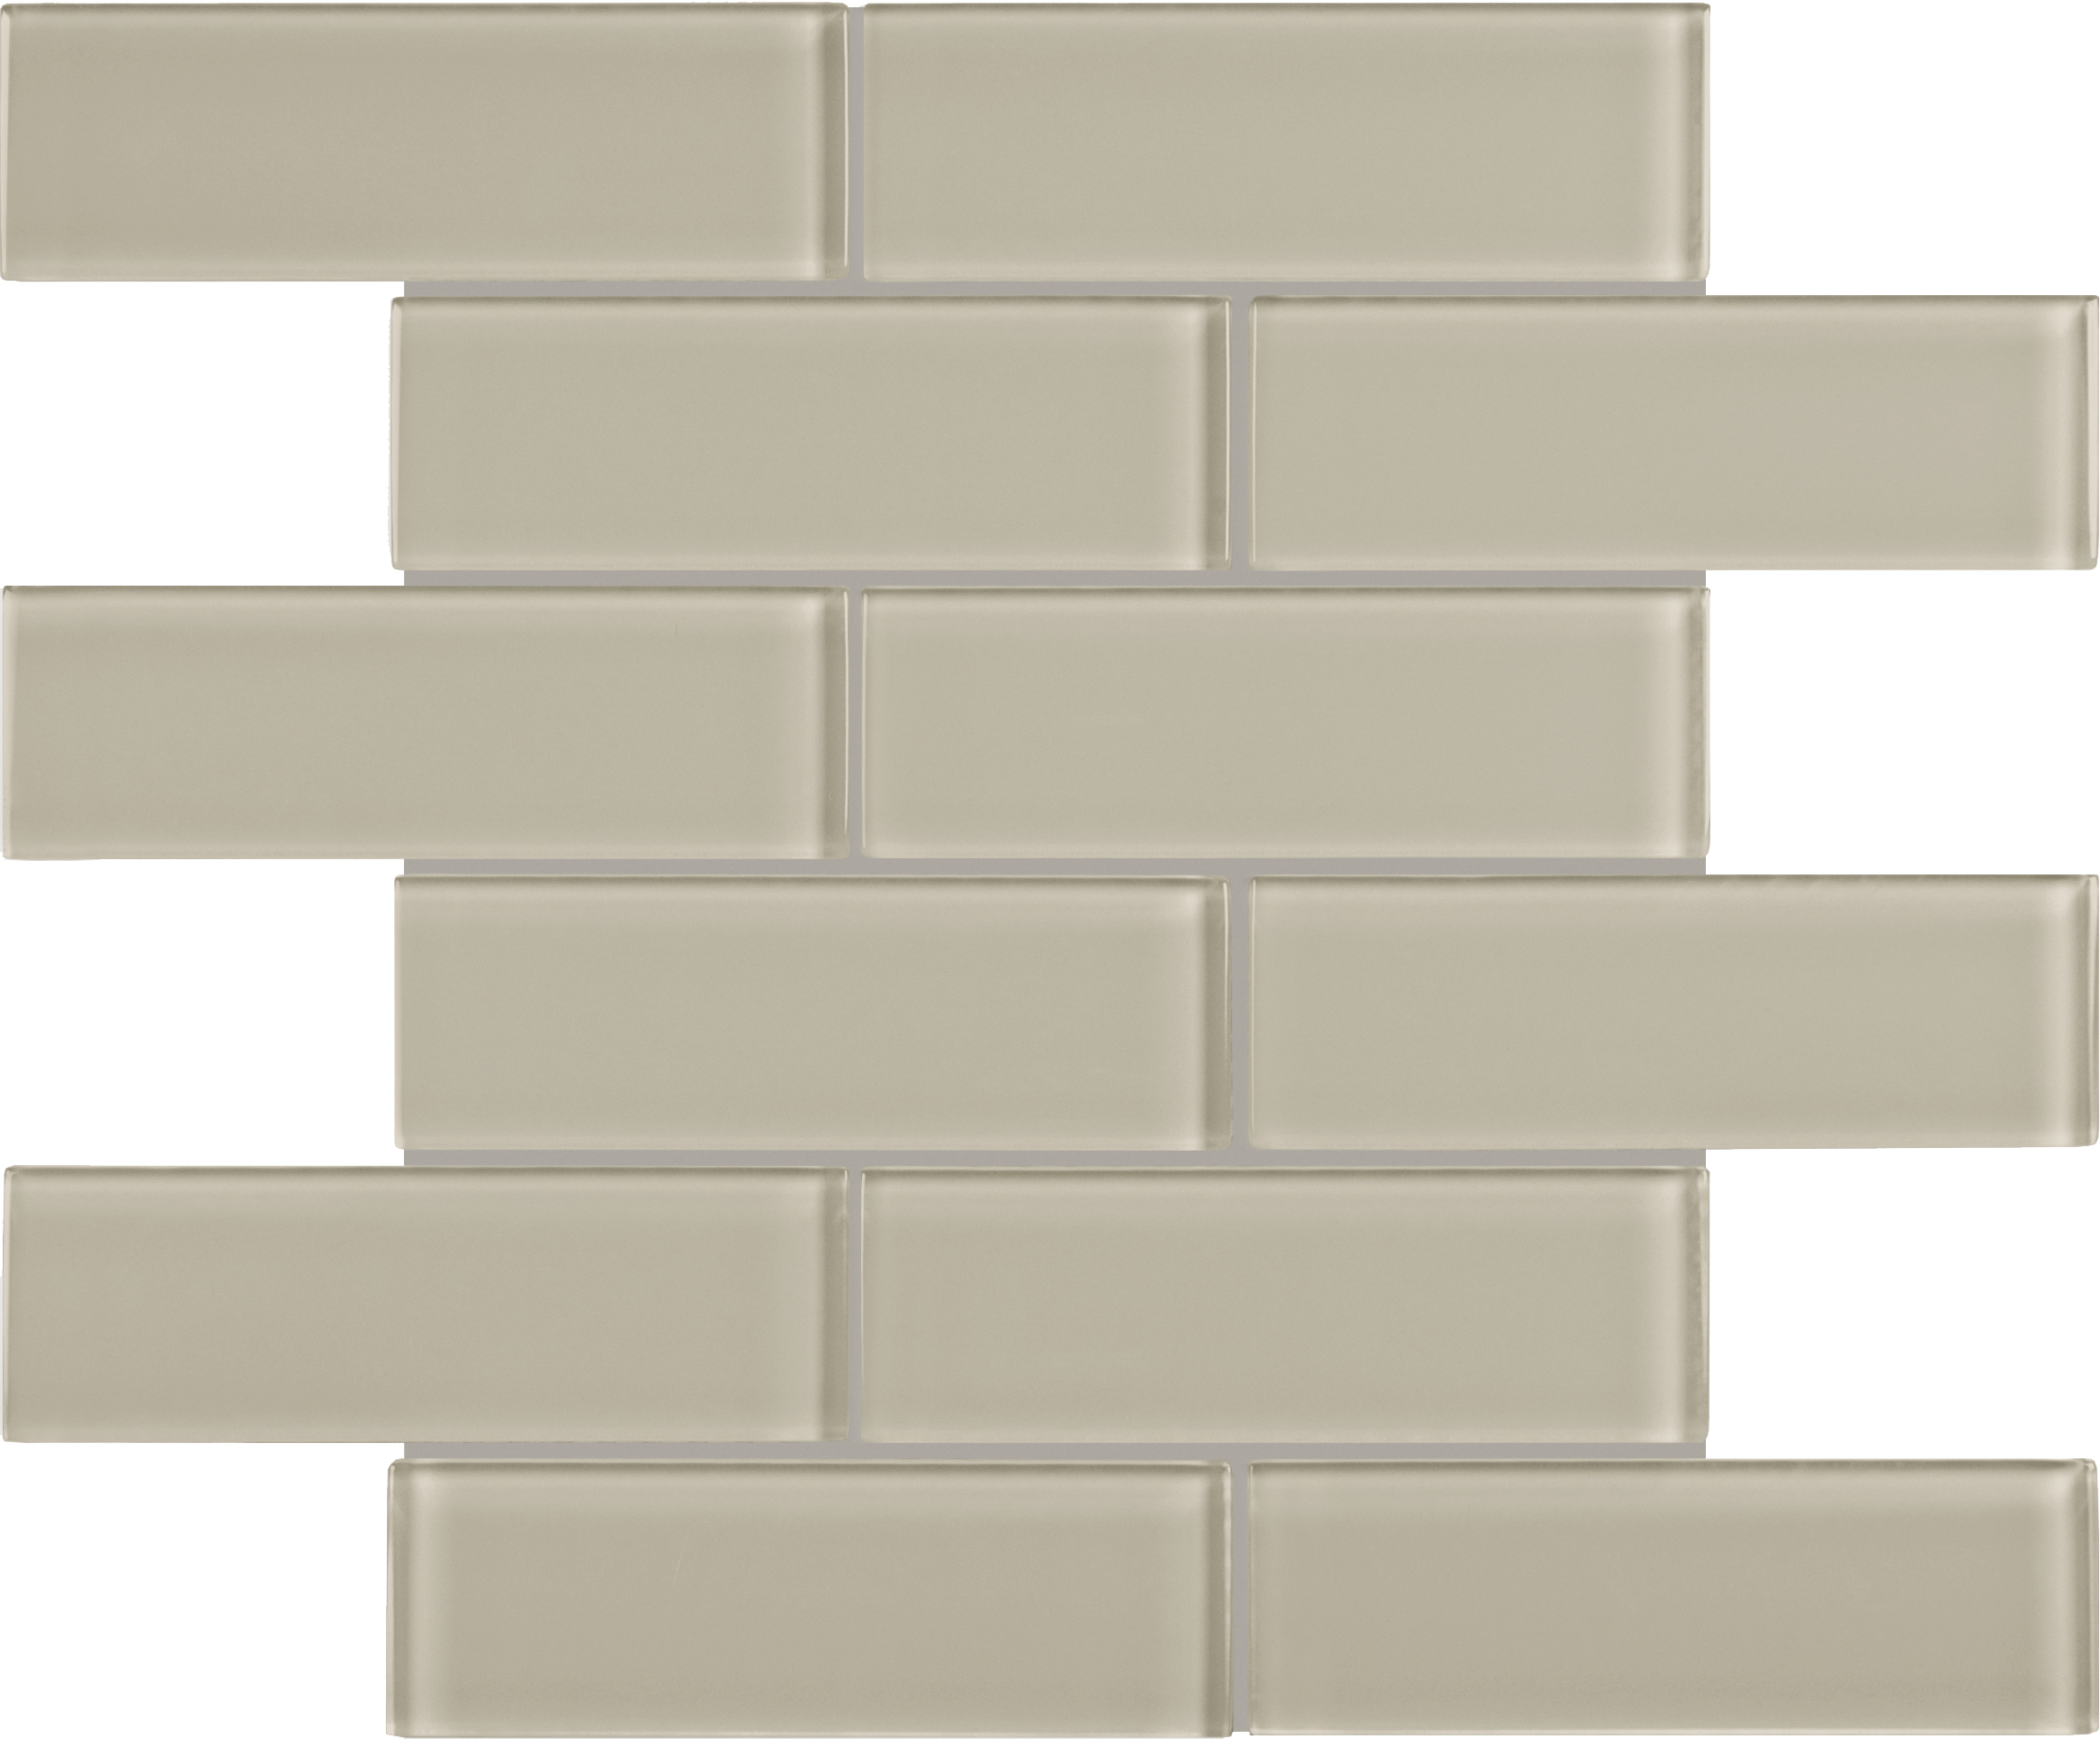 earth brick offset 2x6-inch pattern fused glass mosaic from element anatolia collection distributed by surface group international glossy finish rounded edge mesh shape